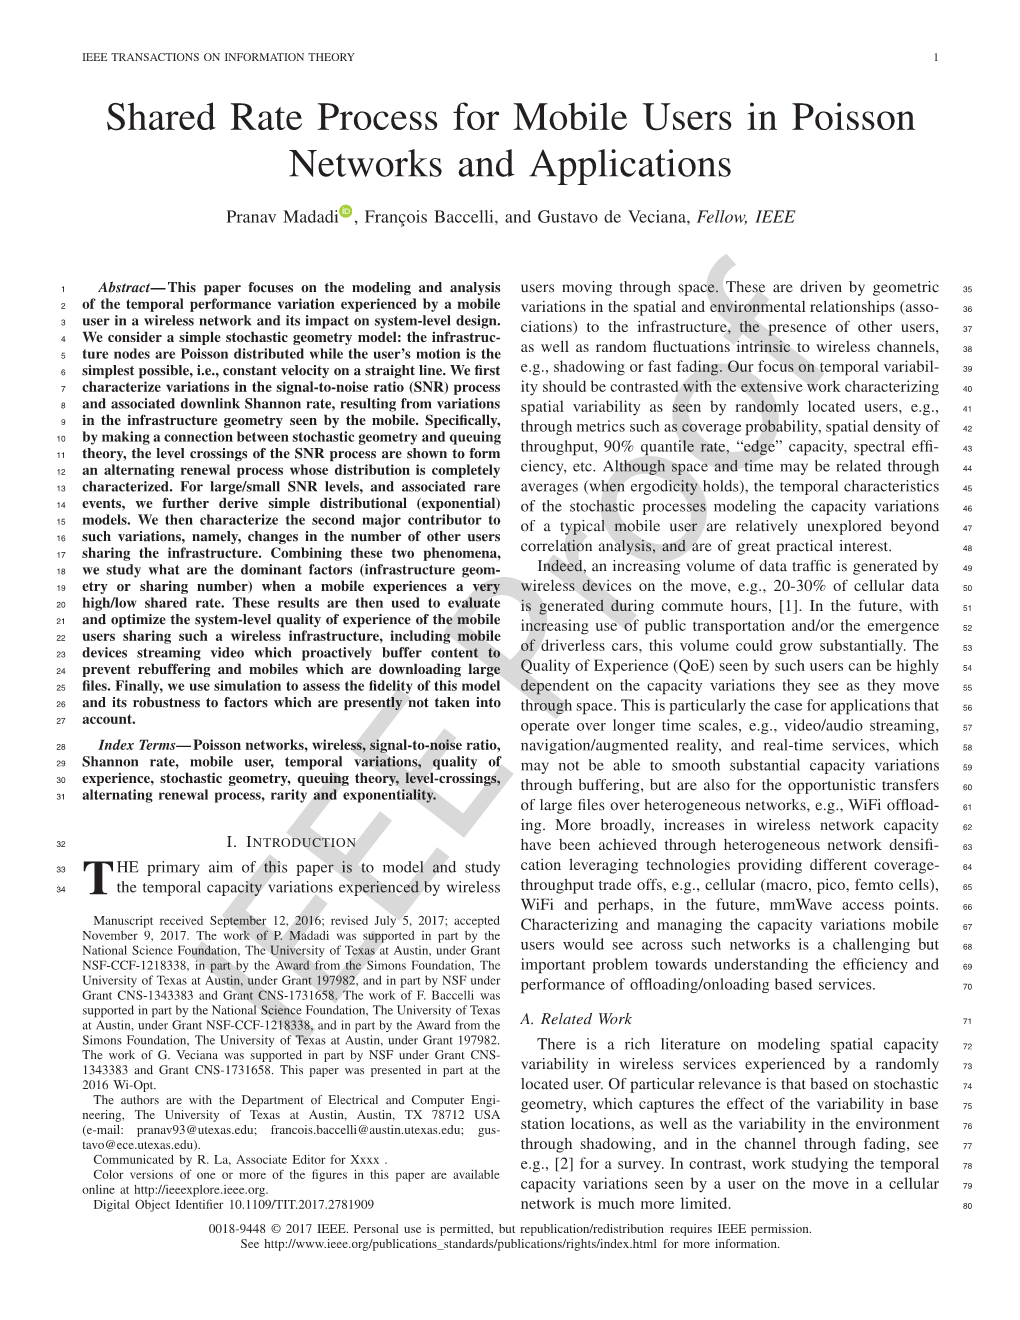 Shared Rate Process for Mobile Users in Poisson Networks and Applications